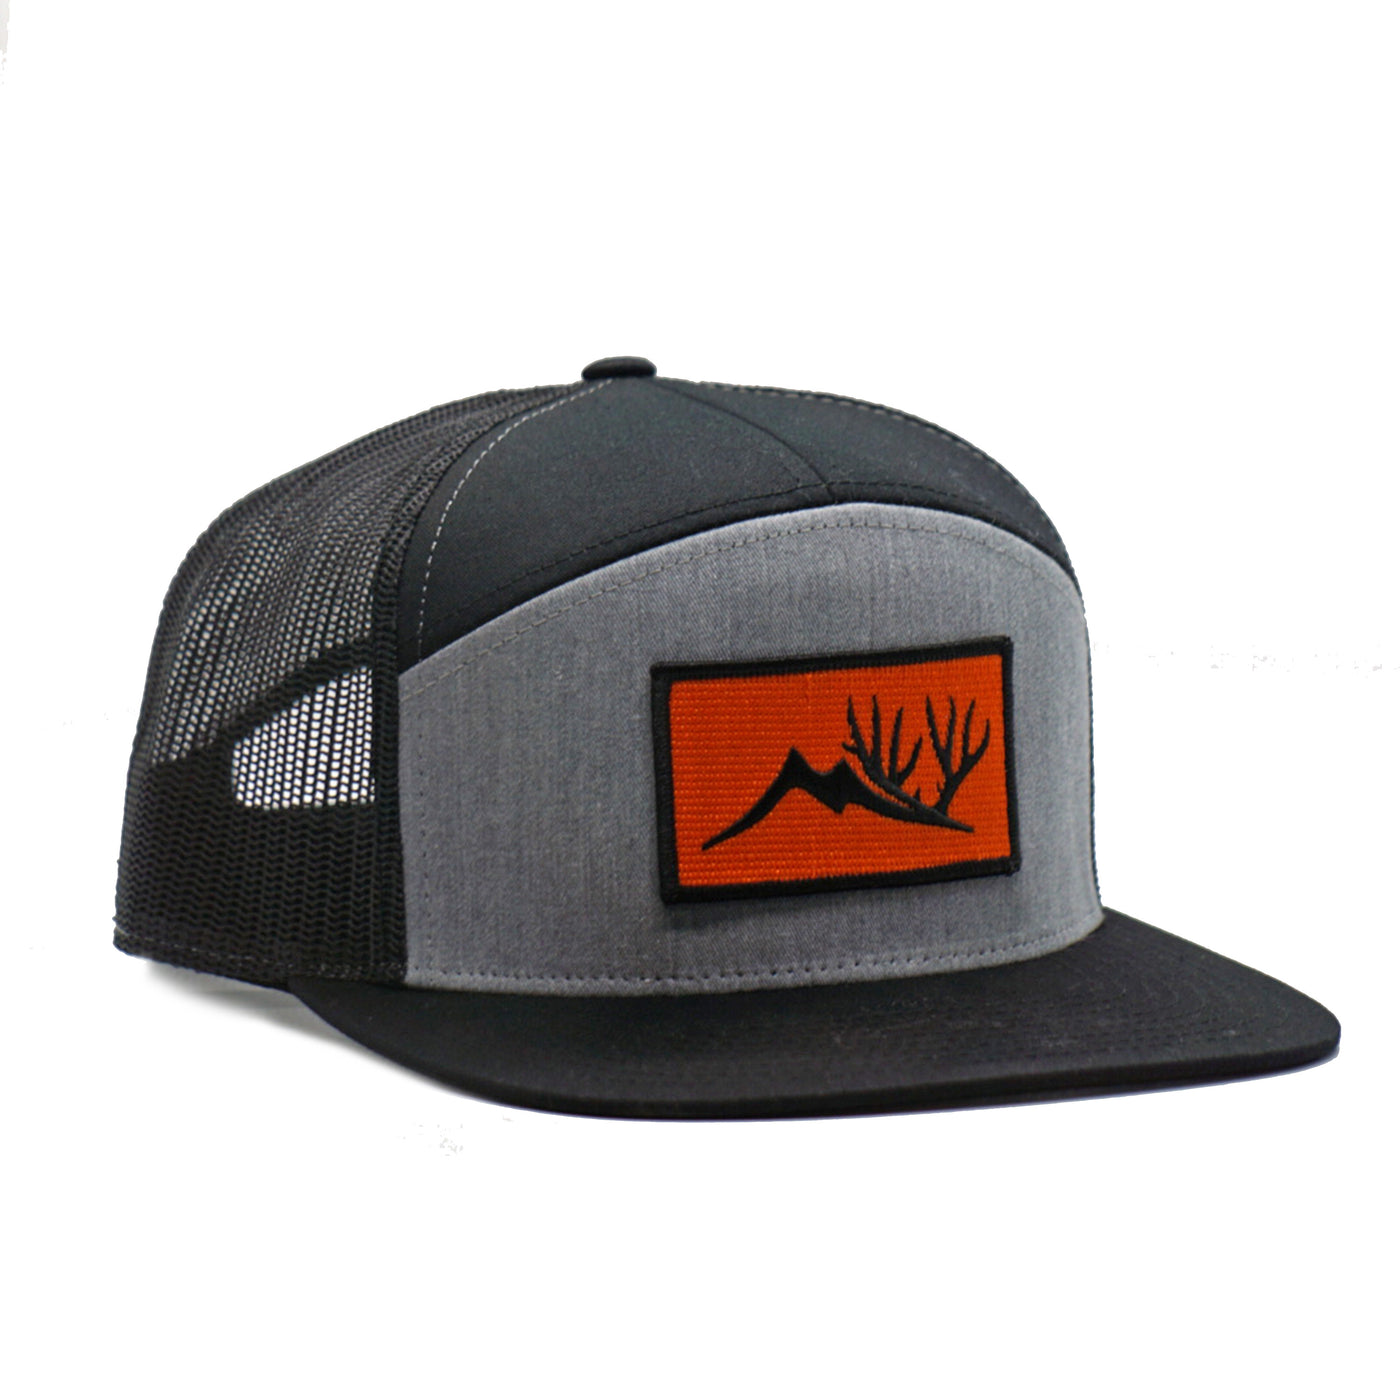 Ball Cap with blakc Brim and netting, Grey Forehead with Orange Altitude Outdoors Patch.